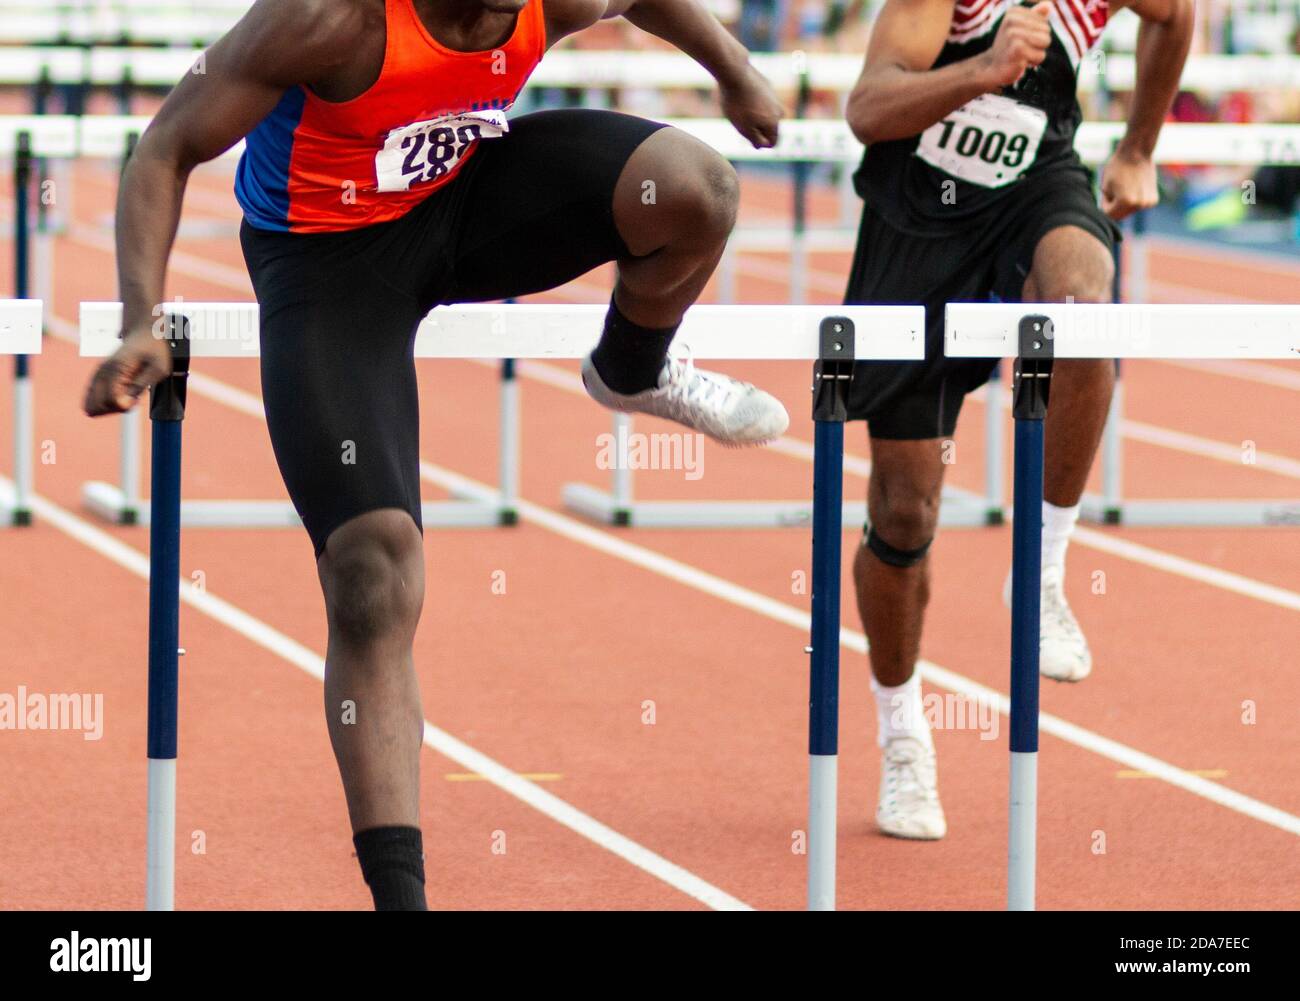 An african american sprinter running in a hurdles race at in indoor track and field competition landing in front of a hurdle. Stock Photo